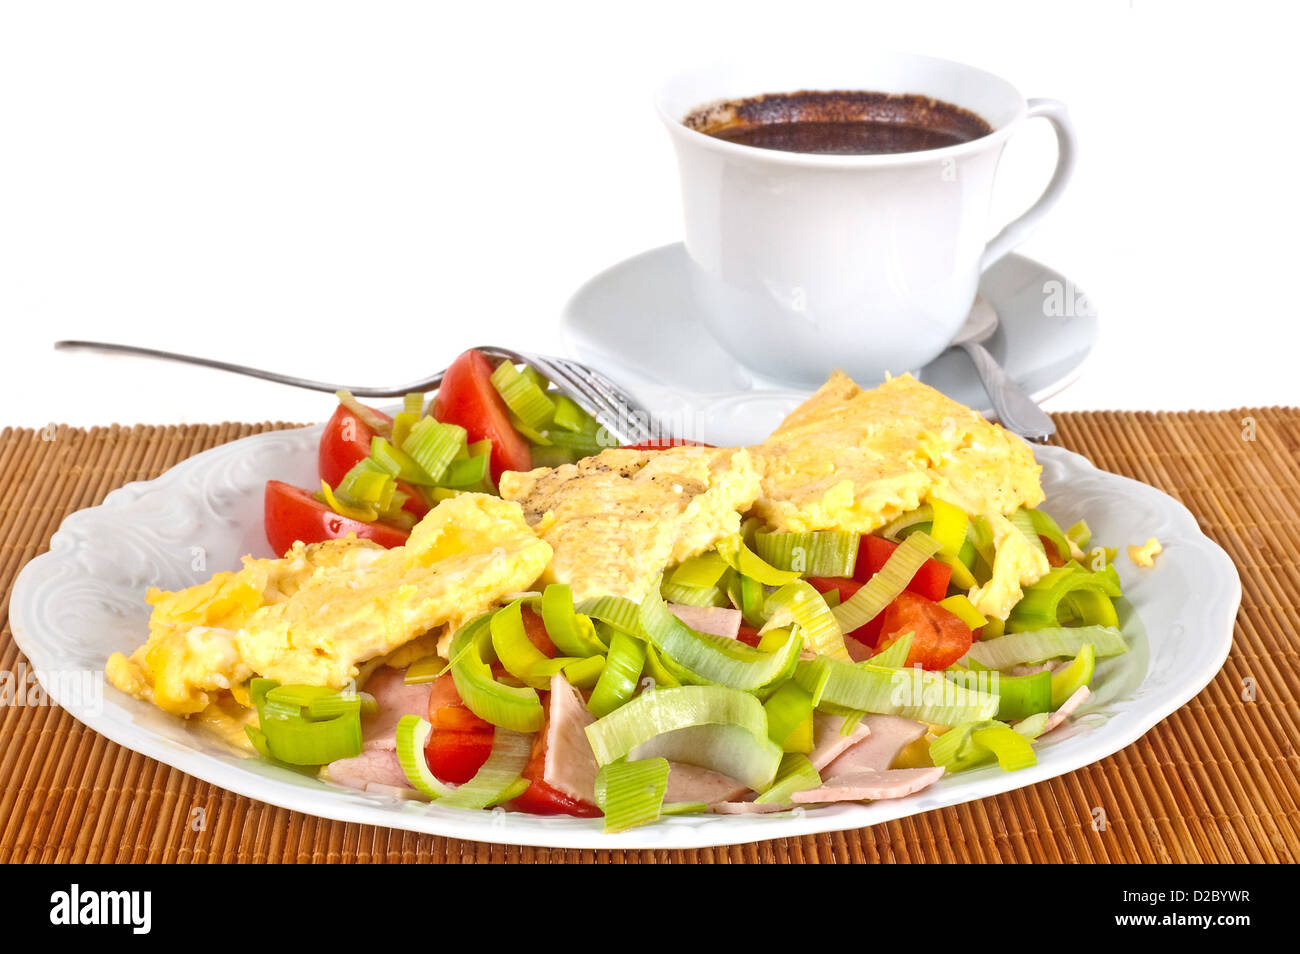 Omelet with vegetables and coffee for breakfast Stock Photo